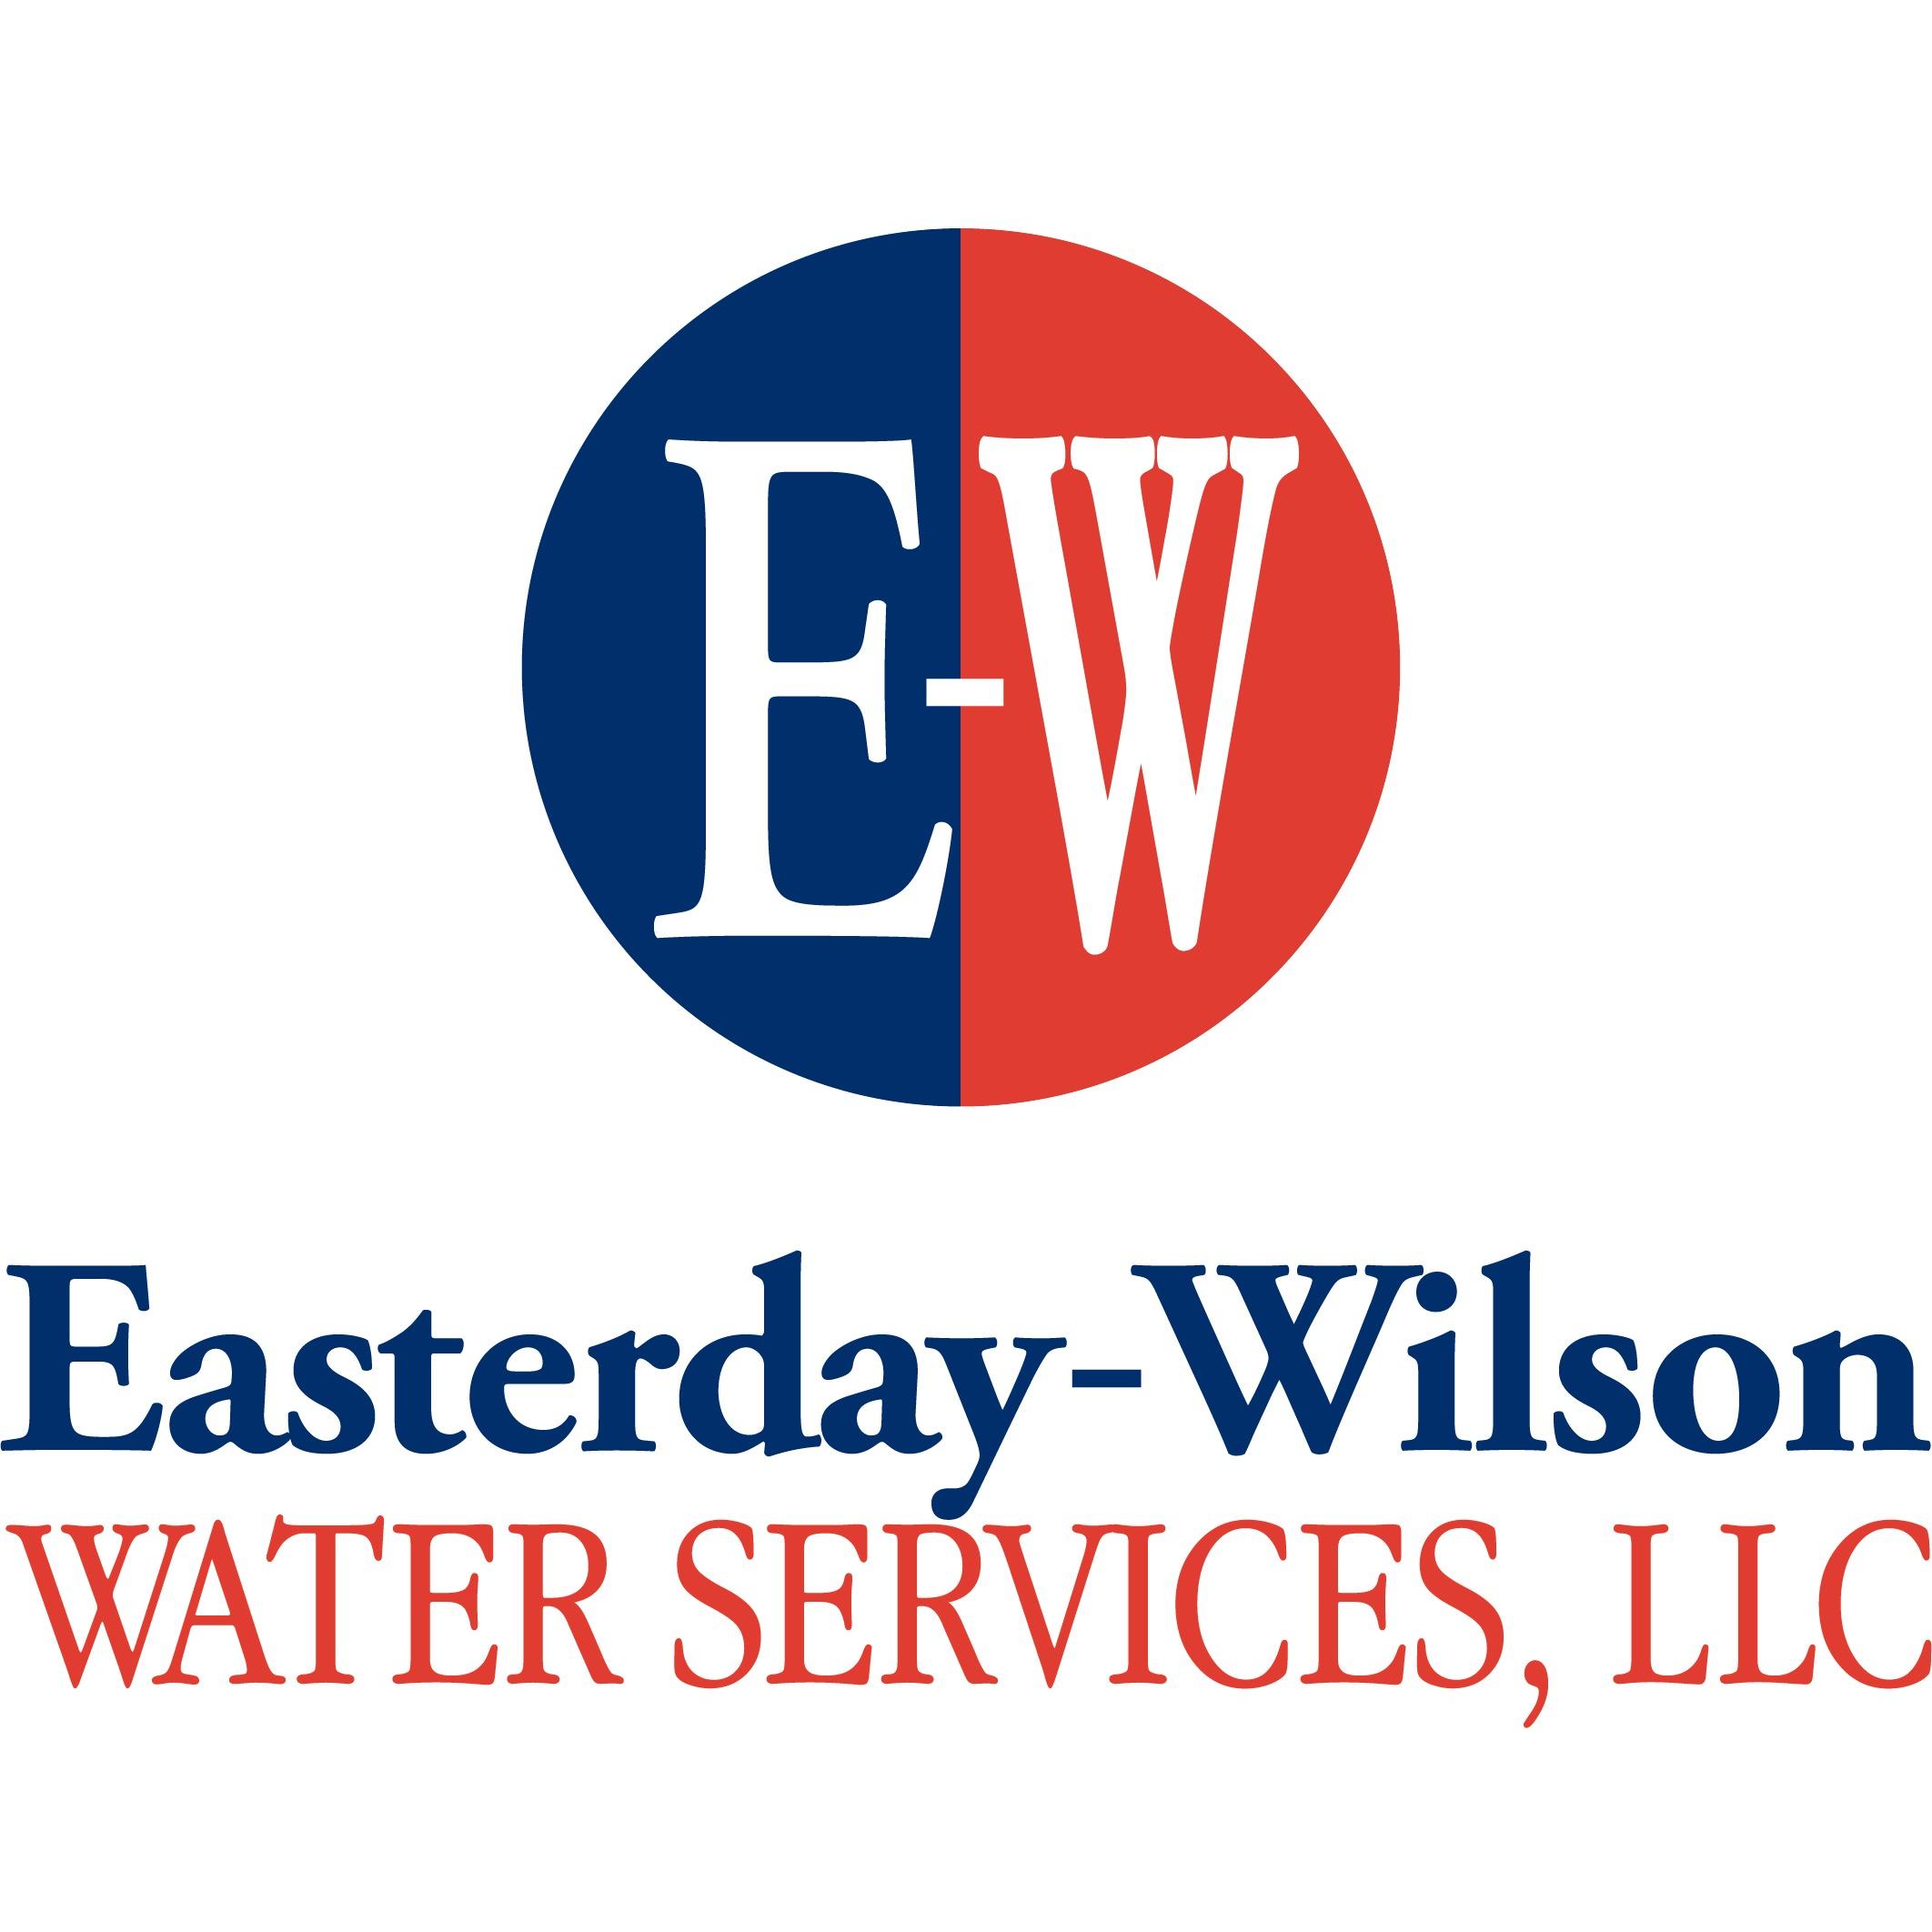 Easterday-Wilson Water Services, LLC Logo